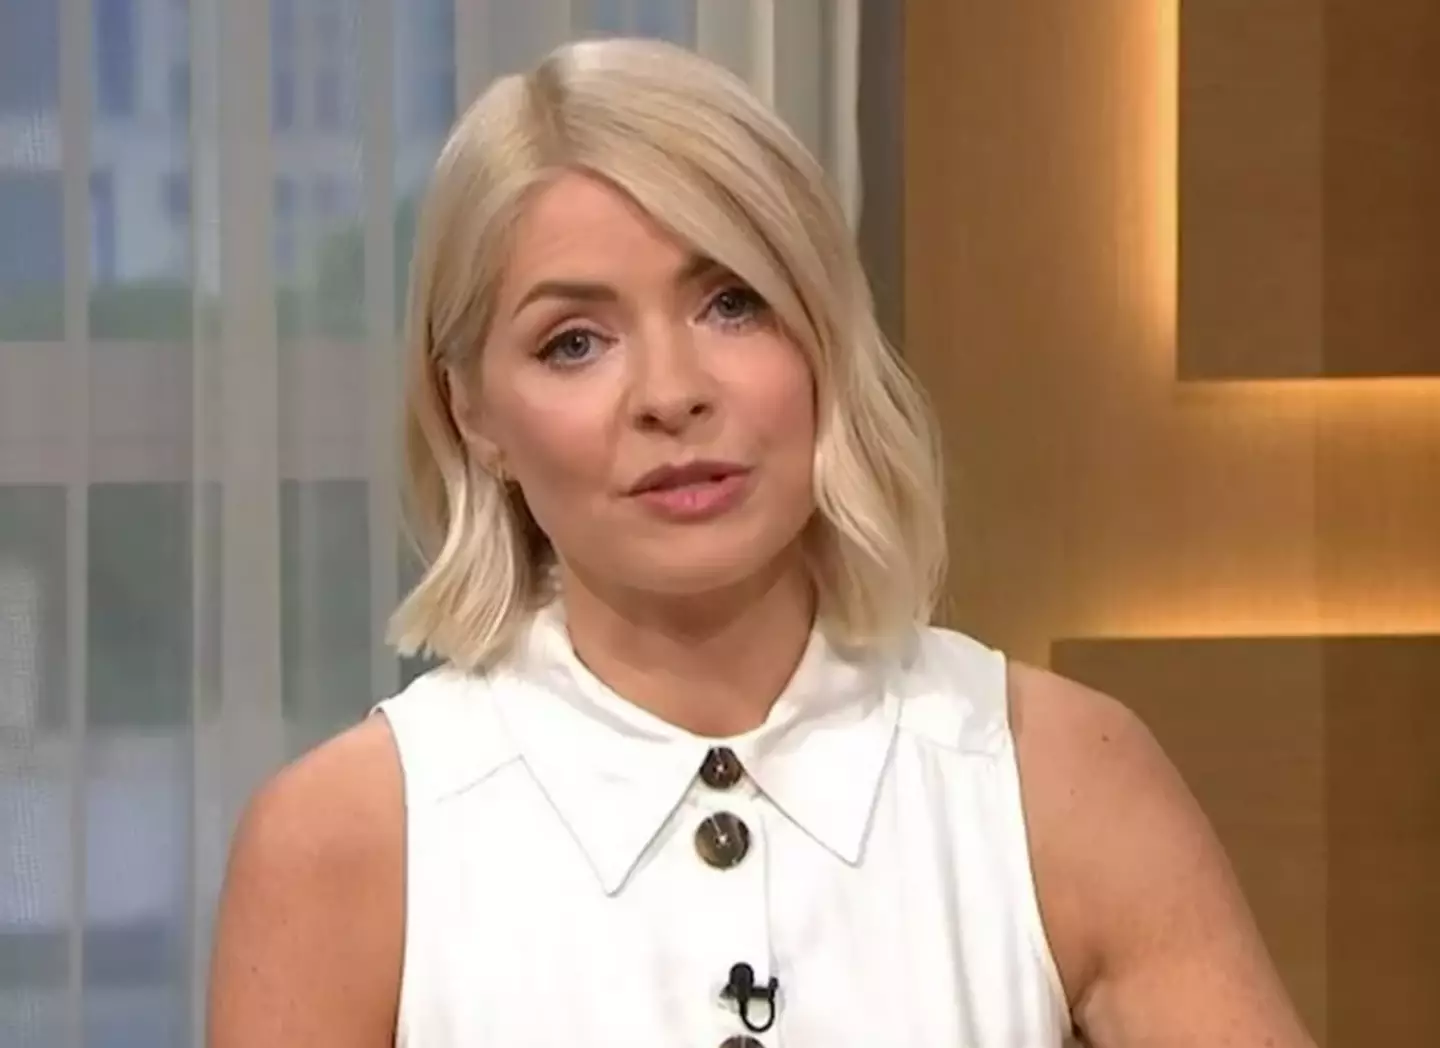 Holly Willoughby has started her annual two-month break for her summer holidays.